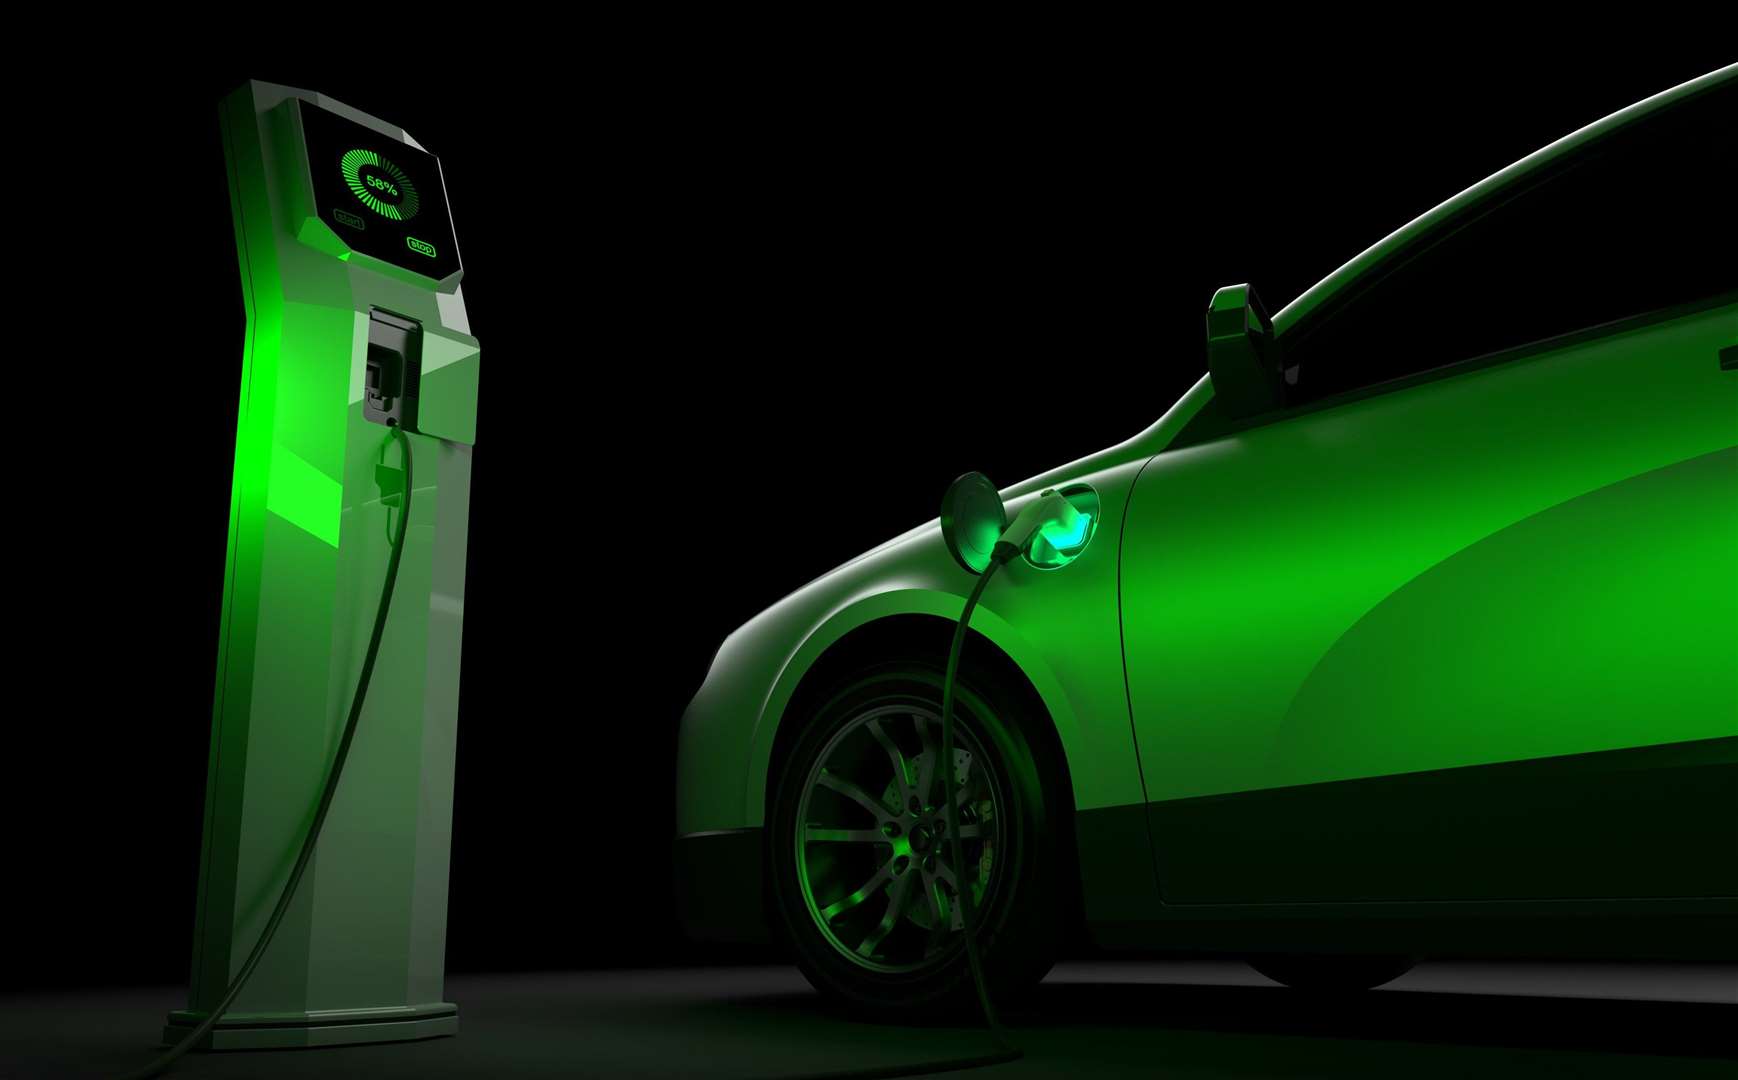 In an age where being green and saving money is so important, electric and hybrid vehicles are definitely worth looking into.